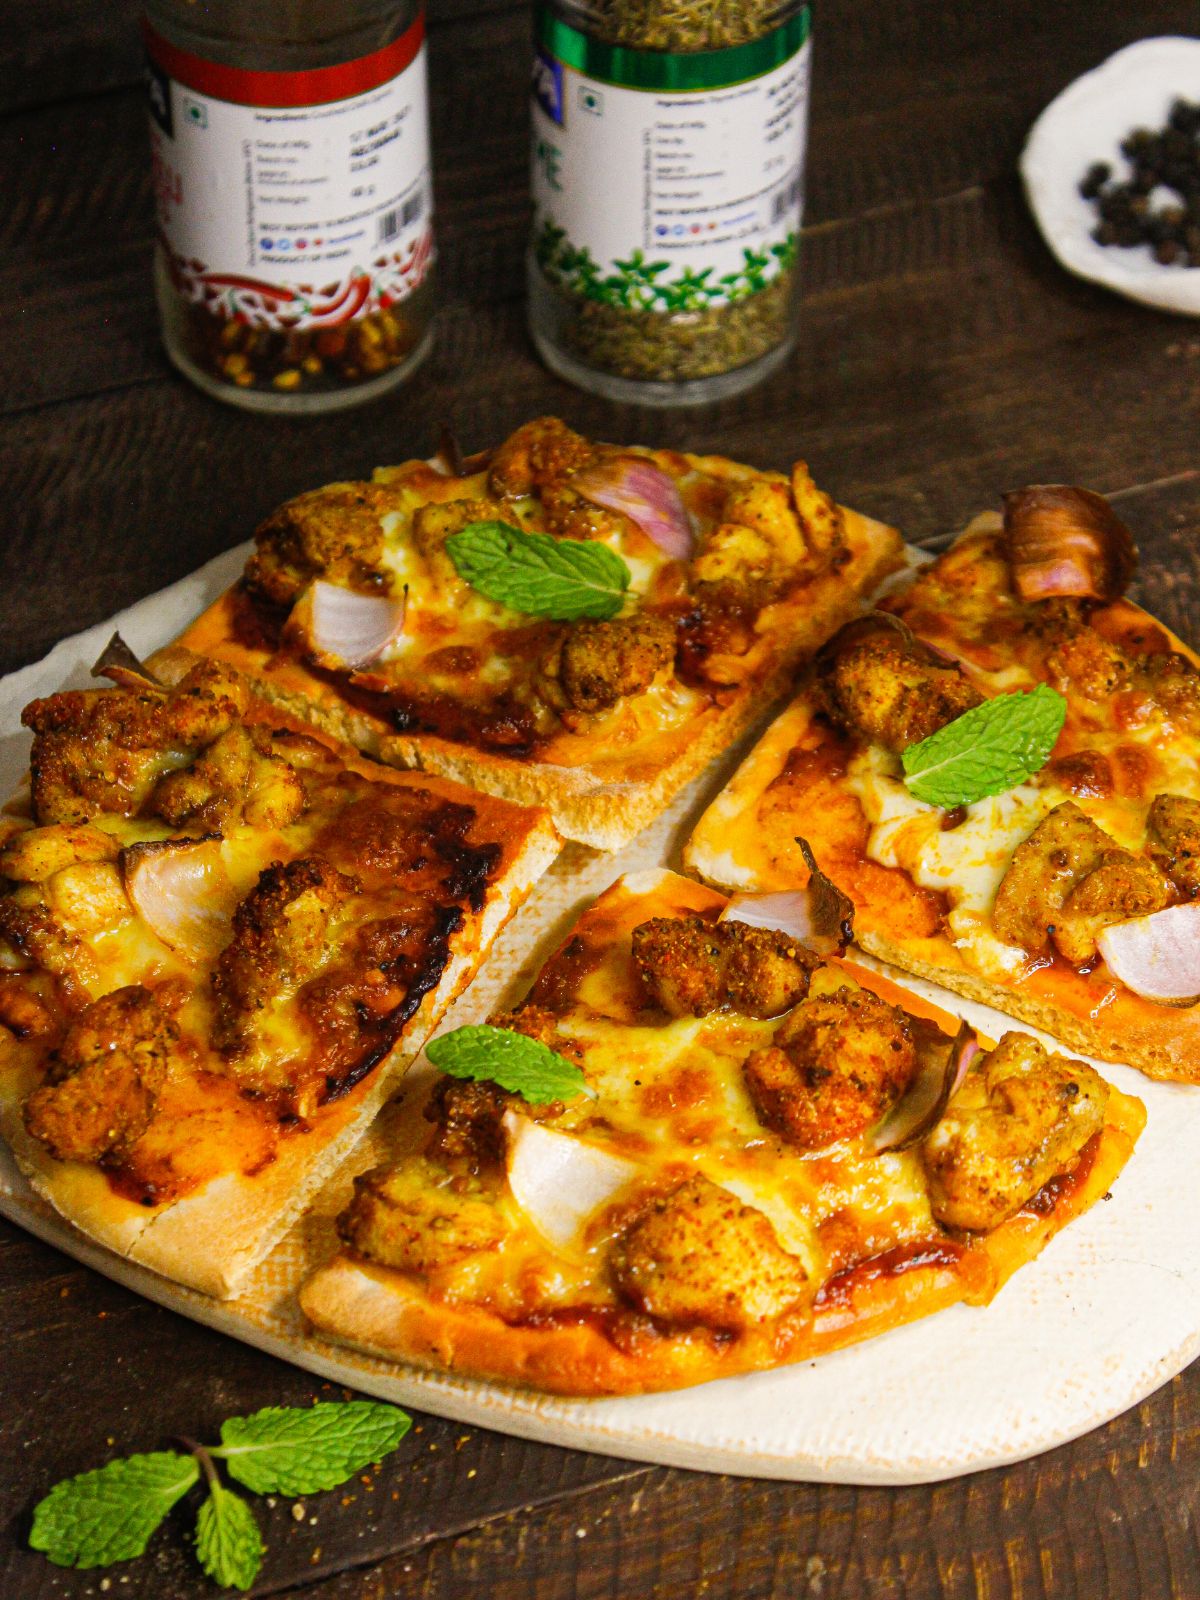 Yummy Tandoori Chicken Pizza garnished with mint leaves